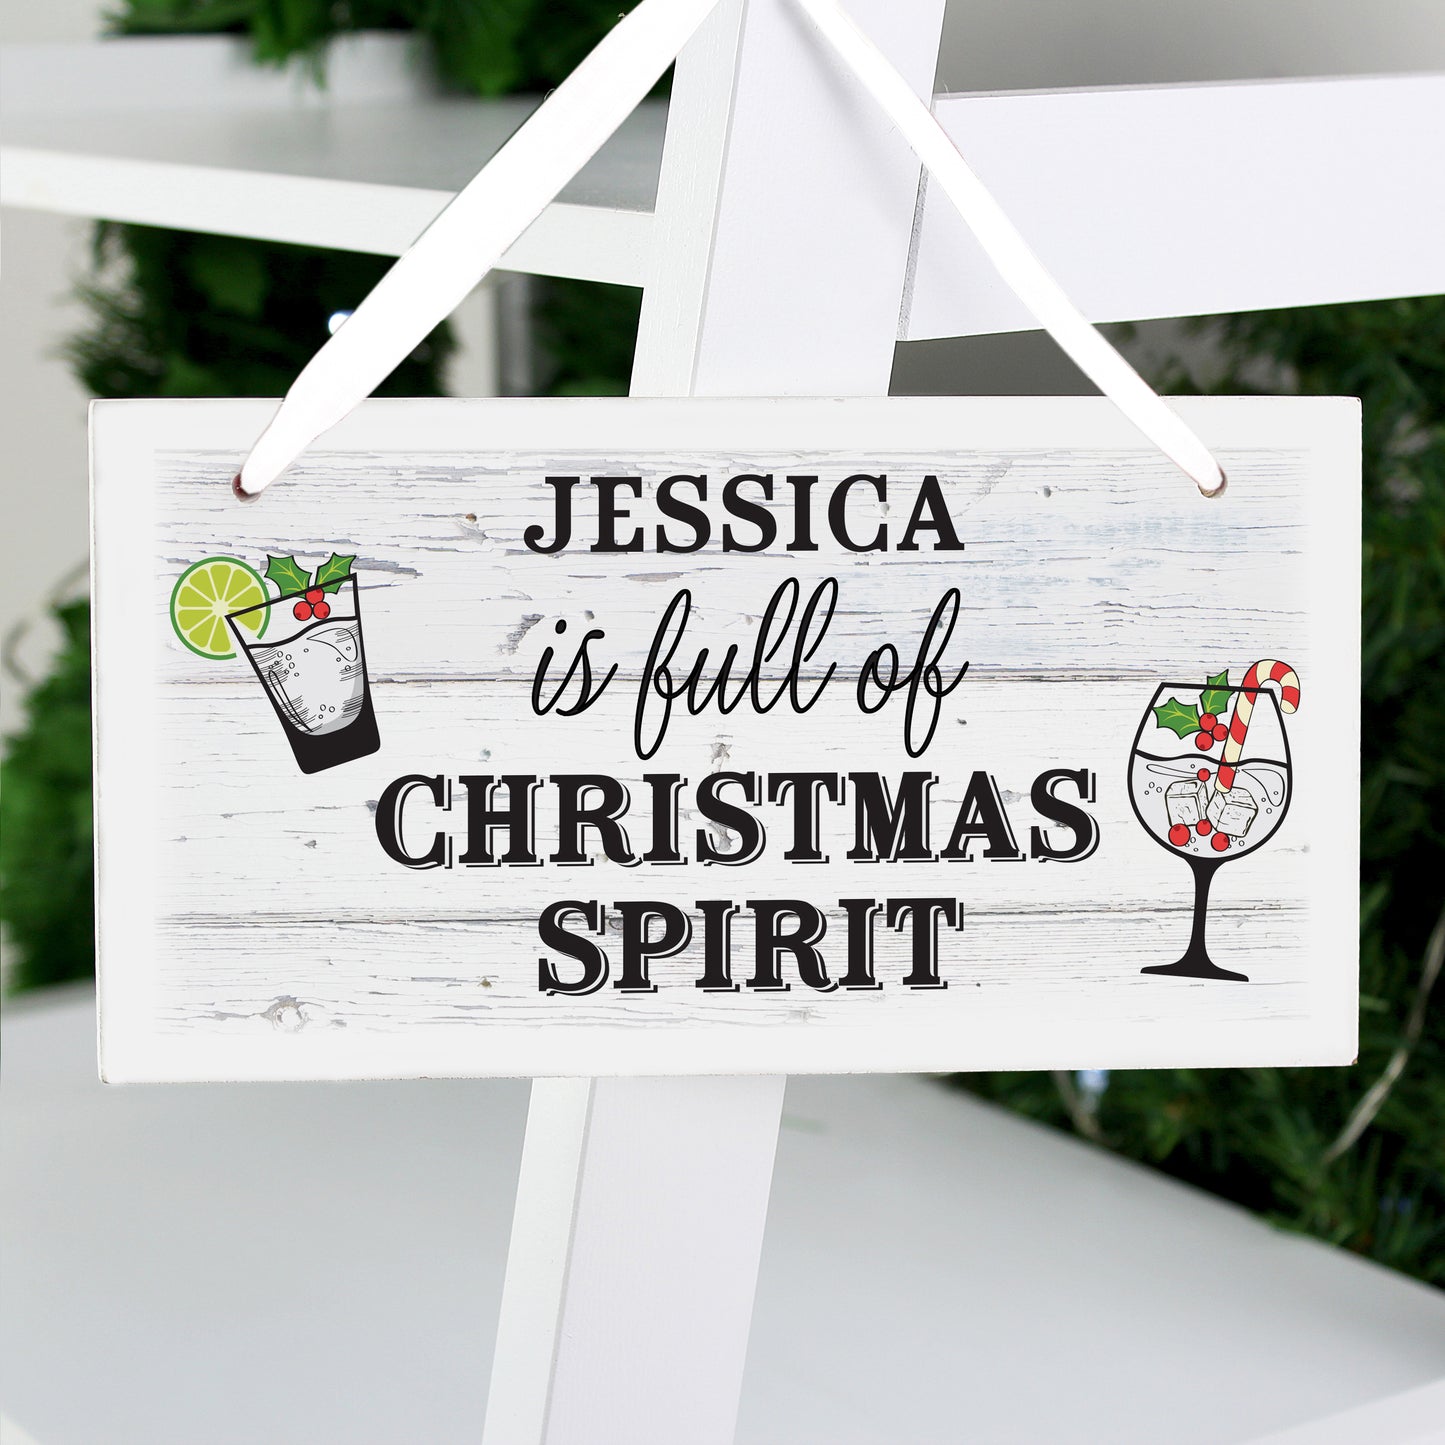 Personalised Christmas Spirit Wooden Sign - Personalise It!